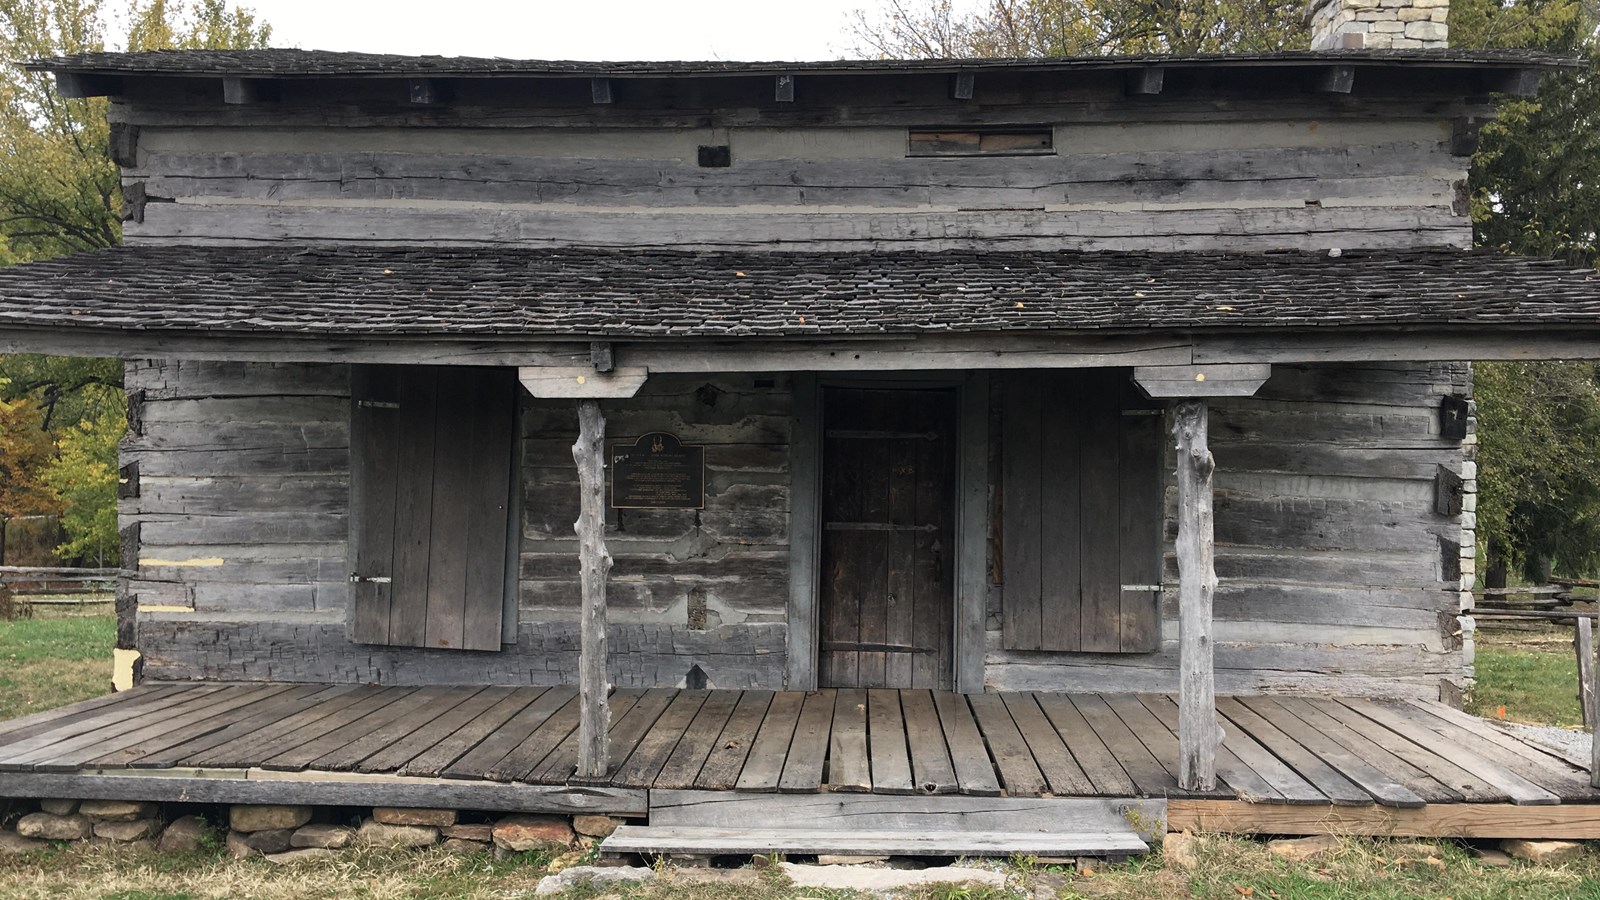 View of the front façade and porch a reproduction of a wooden cabin inhabited by George Rogers Clark